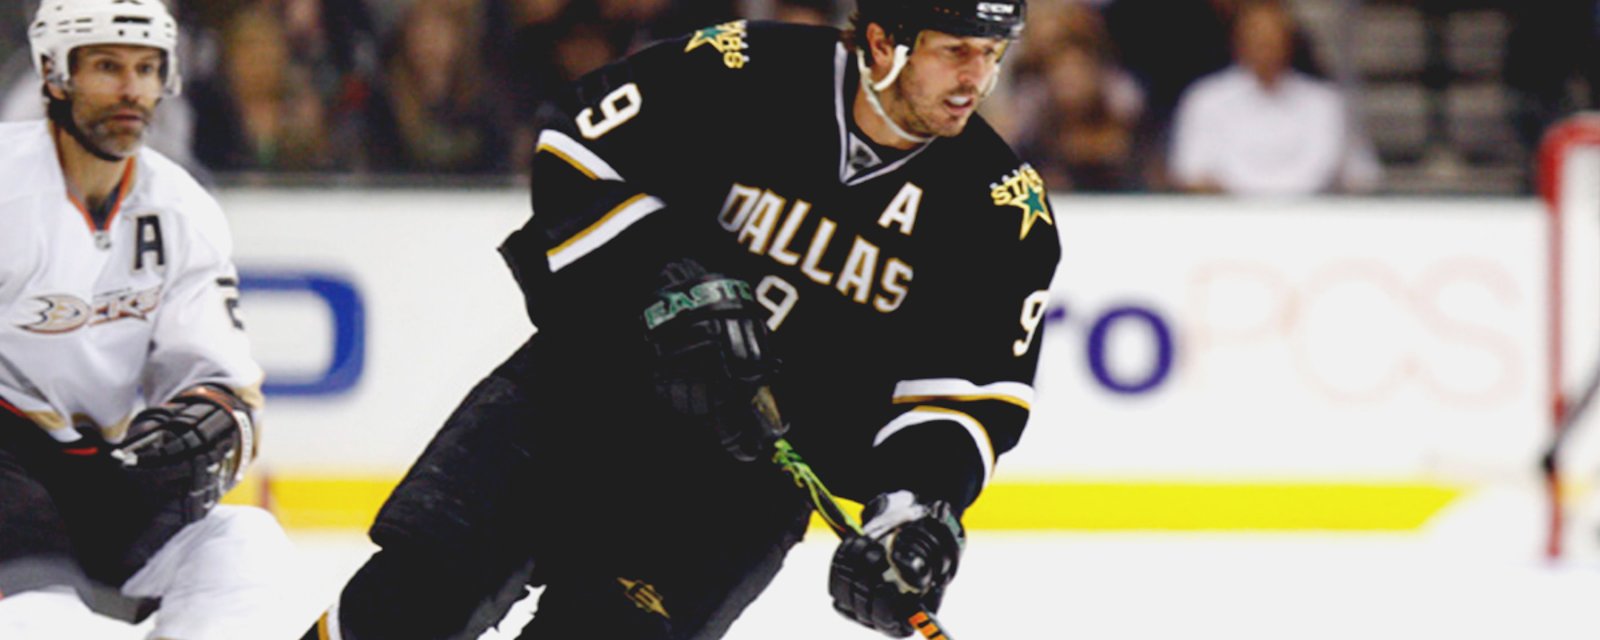 Mike Modano PUBLICLY mocks the Maple Leafs and their fans on Twitter.